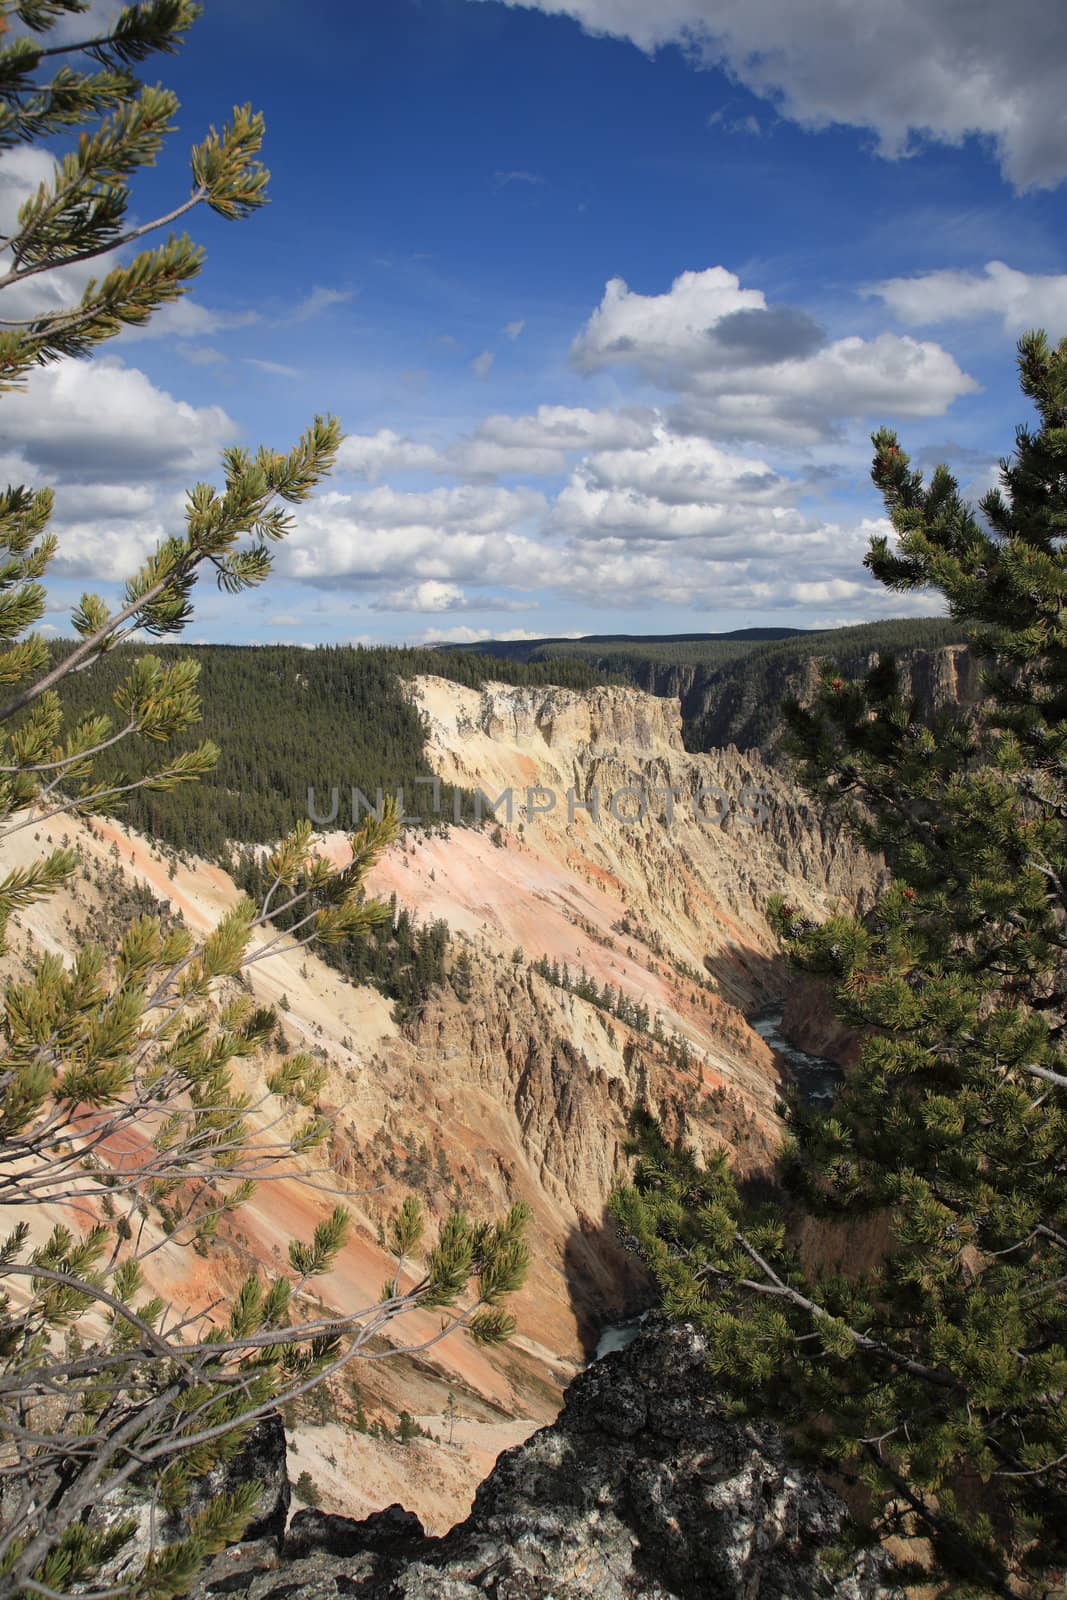 Landmark view of towering cliffs in Yellowstone National Park